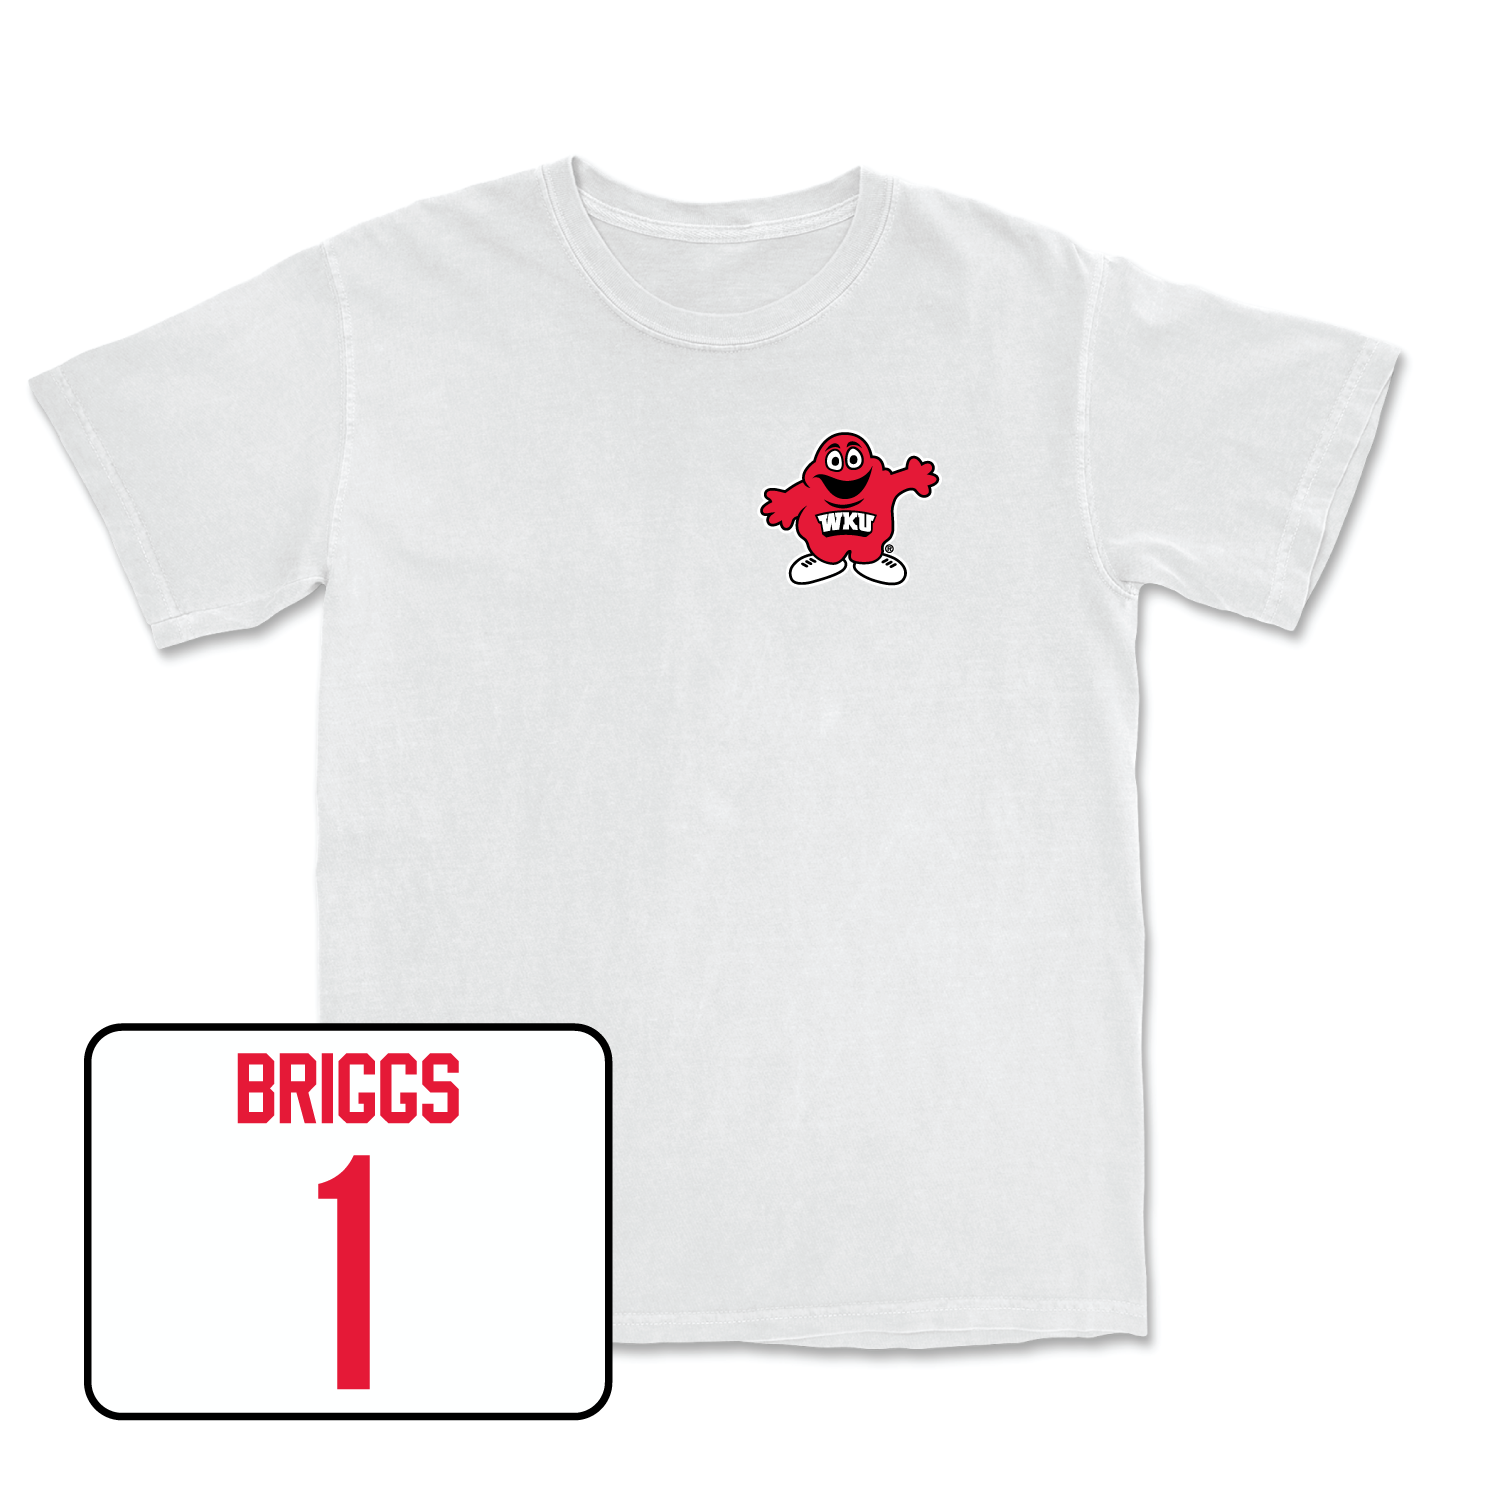 White Women's Volleyball Big Red Comfort Colors Tee Youth Medium / Paige Briggs | #1